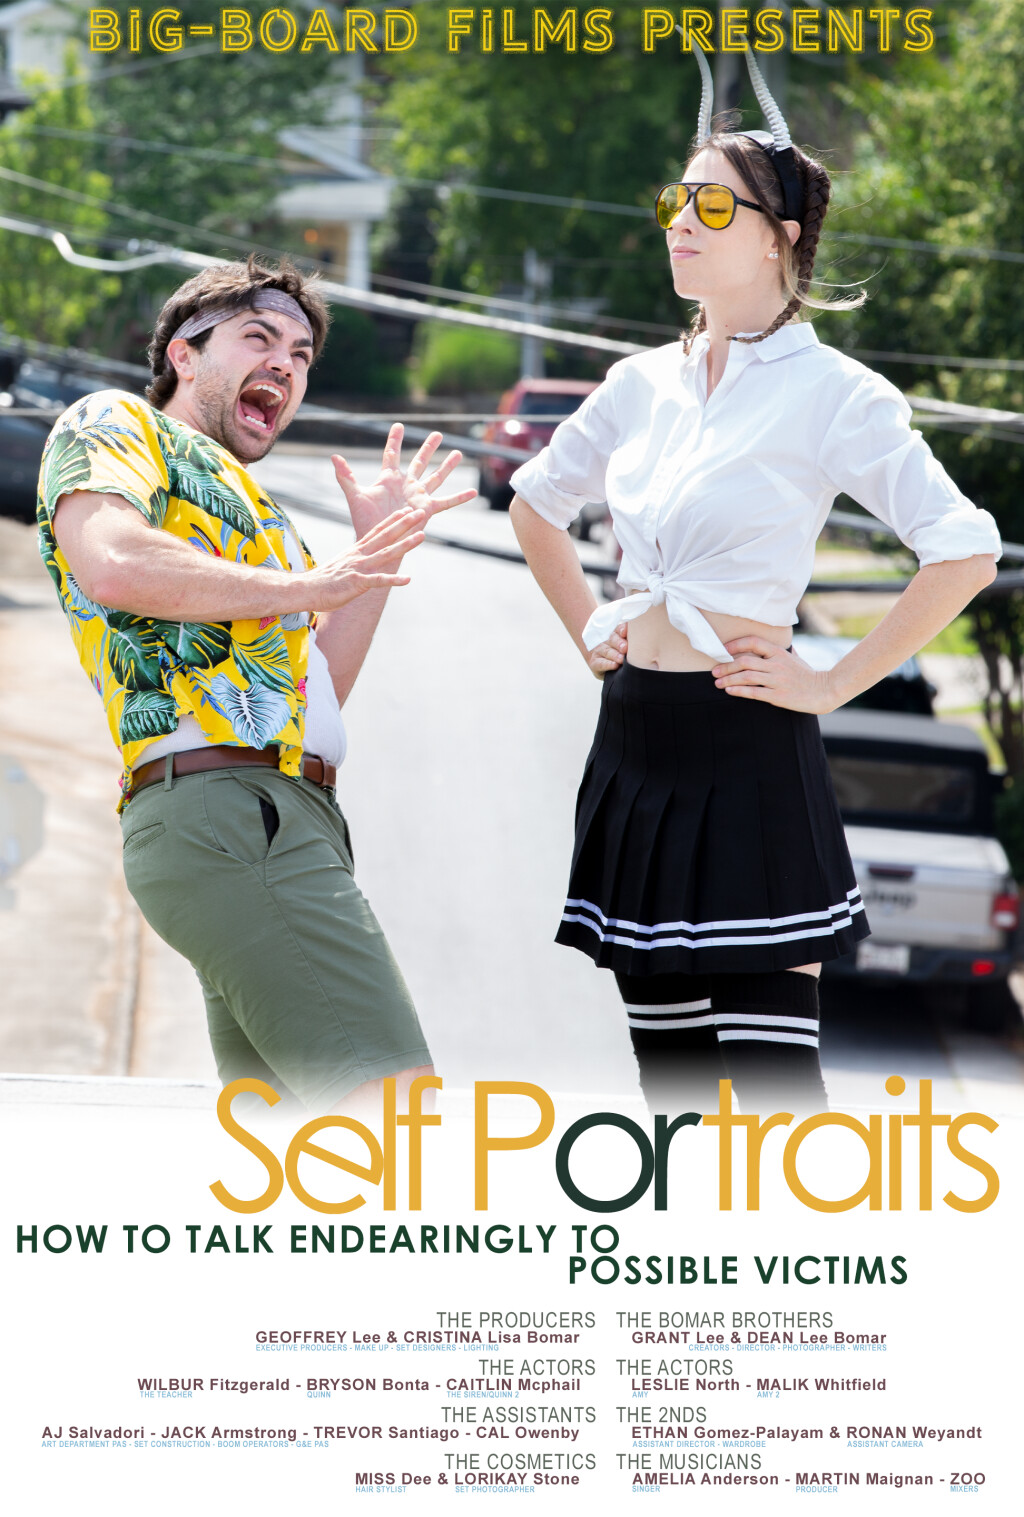 Filmposter for Self Portraits or: How to talk endearingly to possible victims